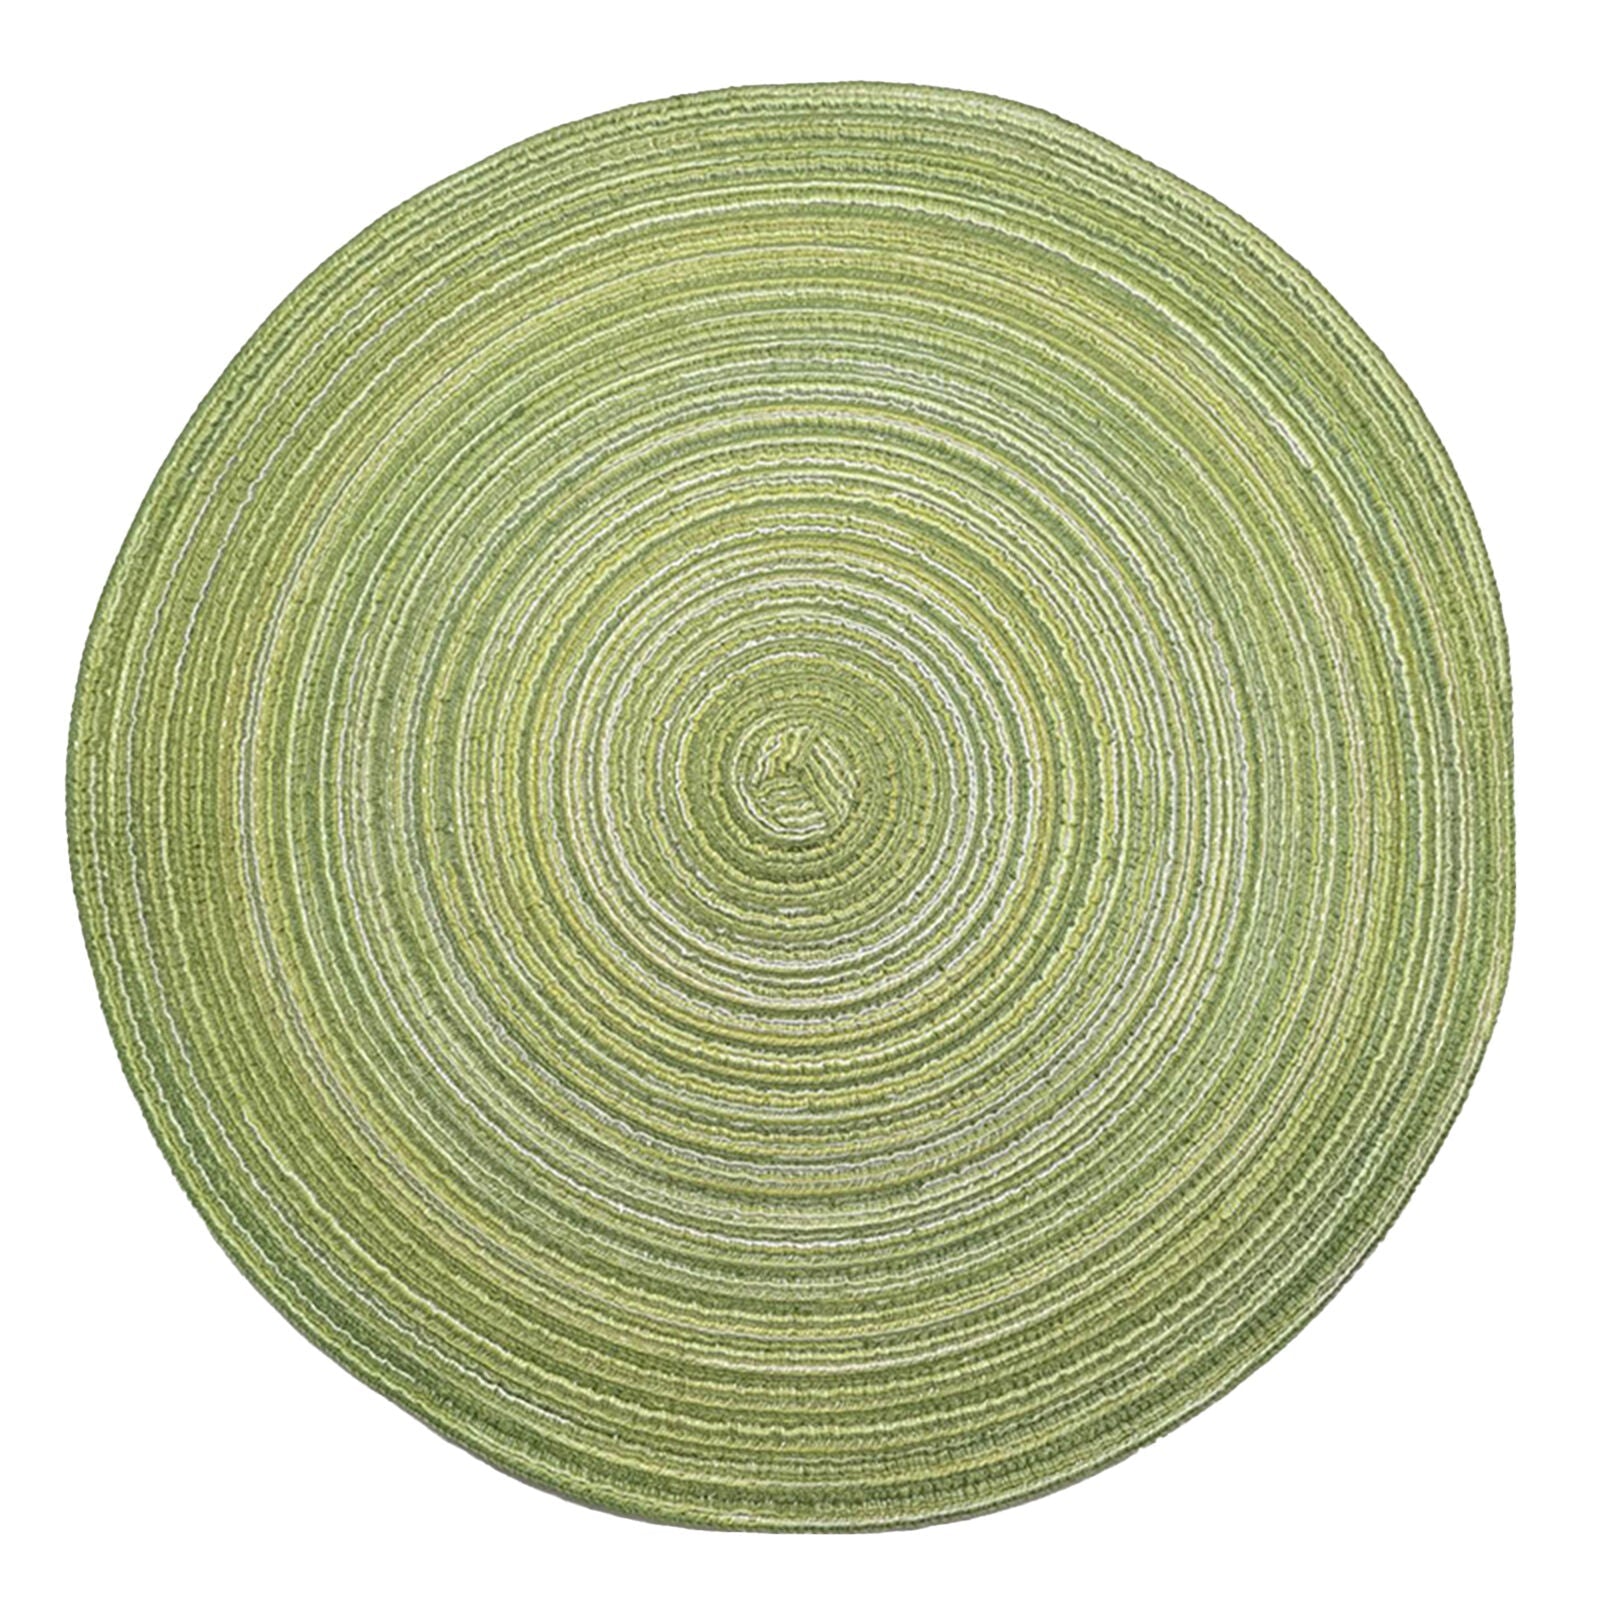 4PCS Green 30CM Round Jacquard-Weaved Non Slip Placemats Dining Table Place Mats Set